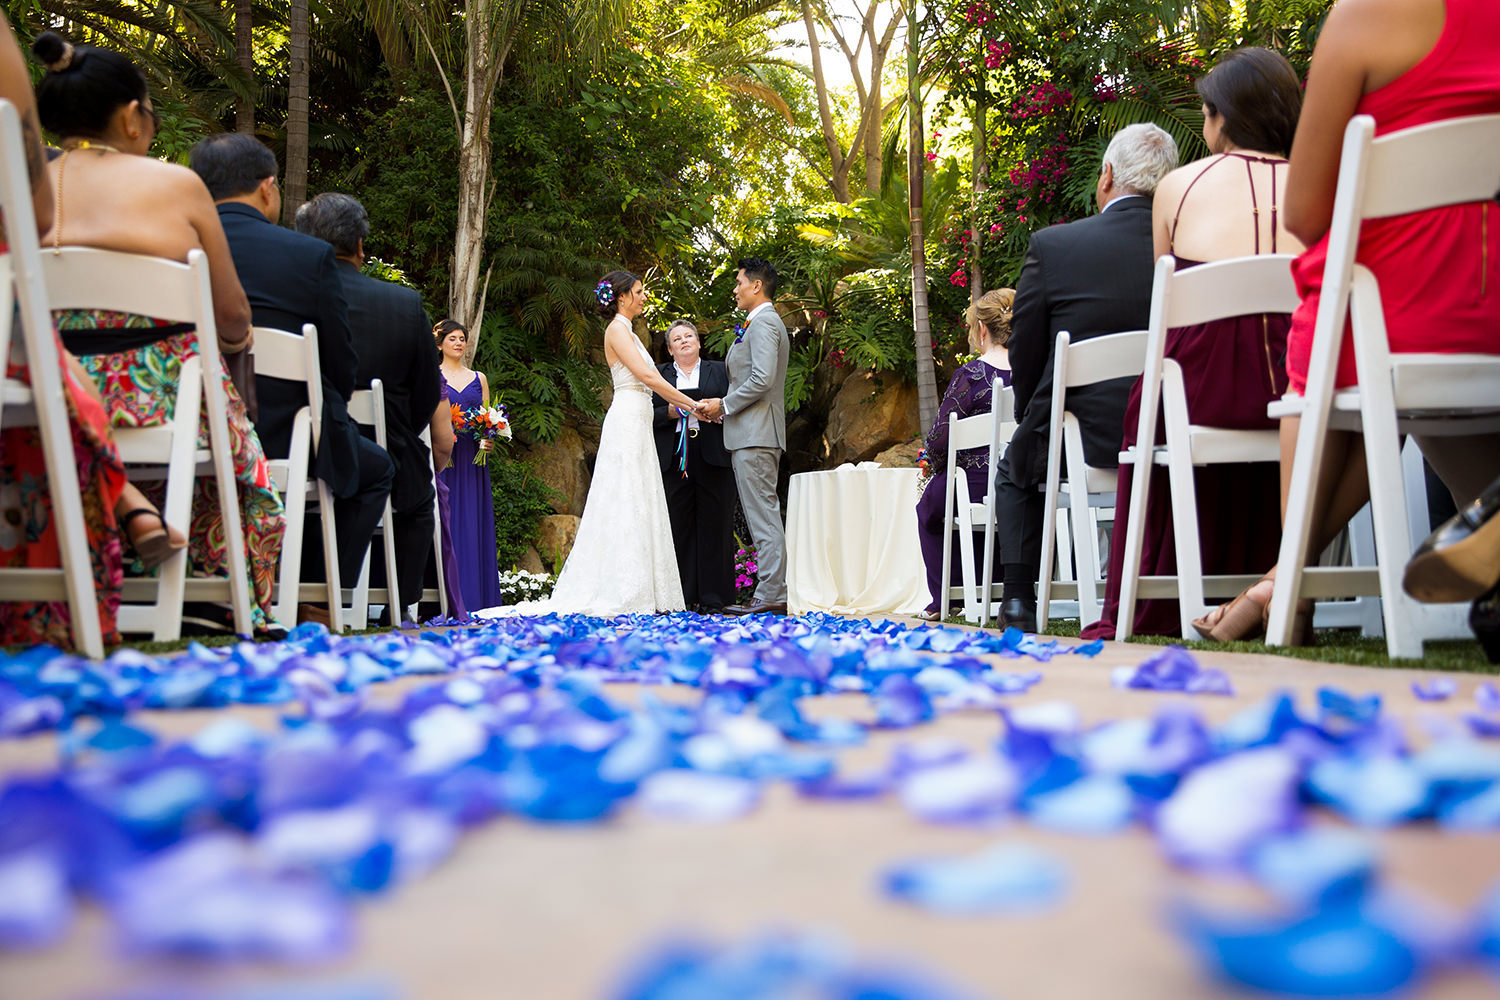 Creative angles for wedding ceremony photography